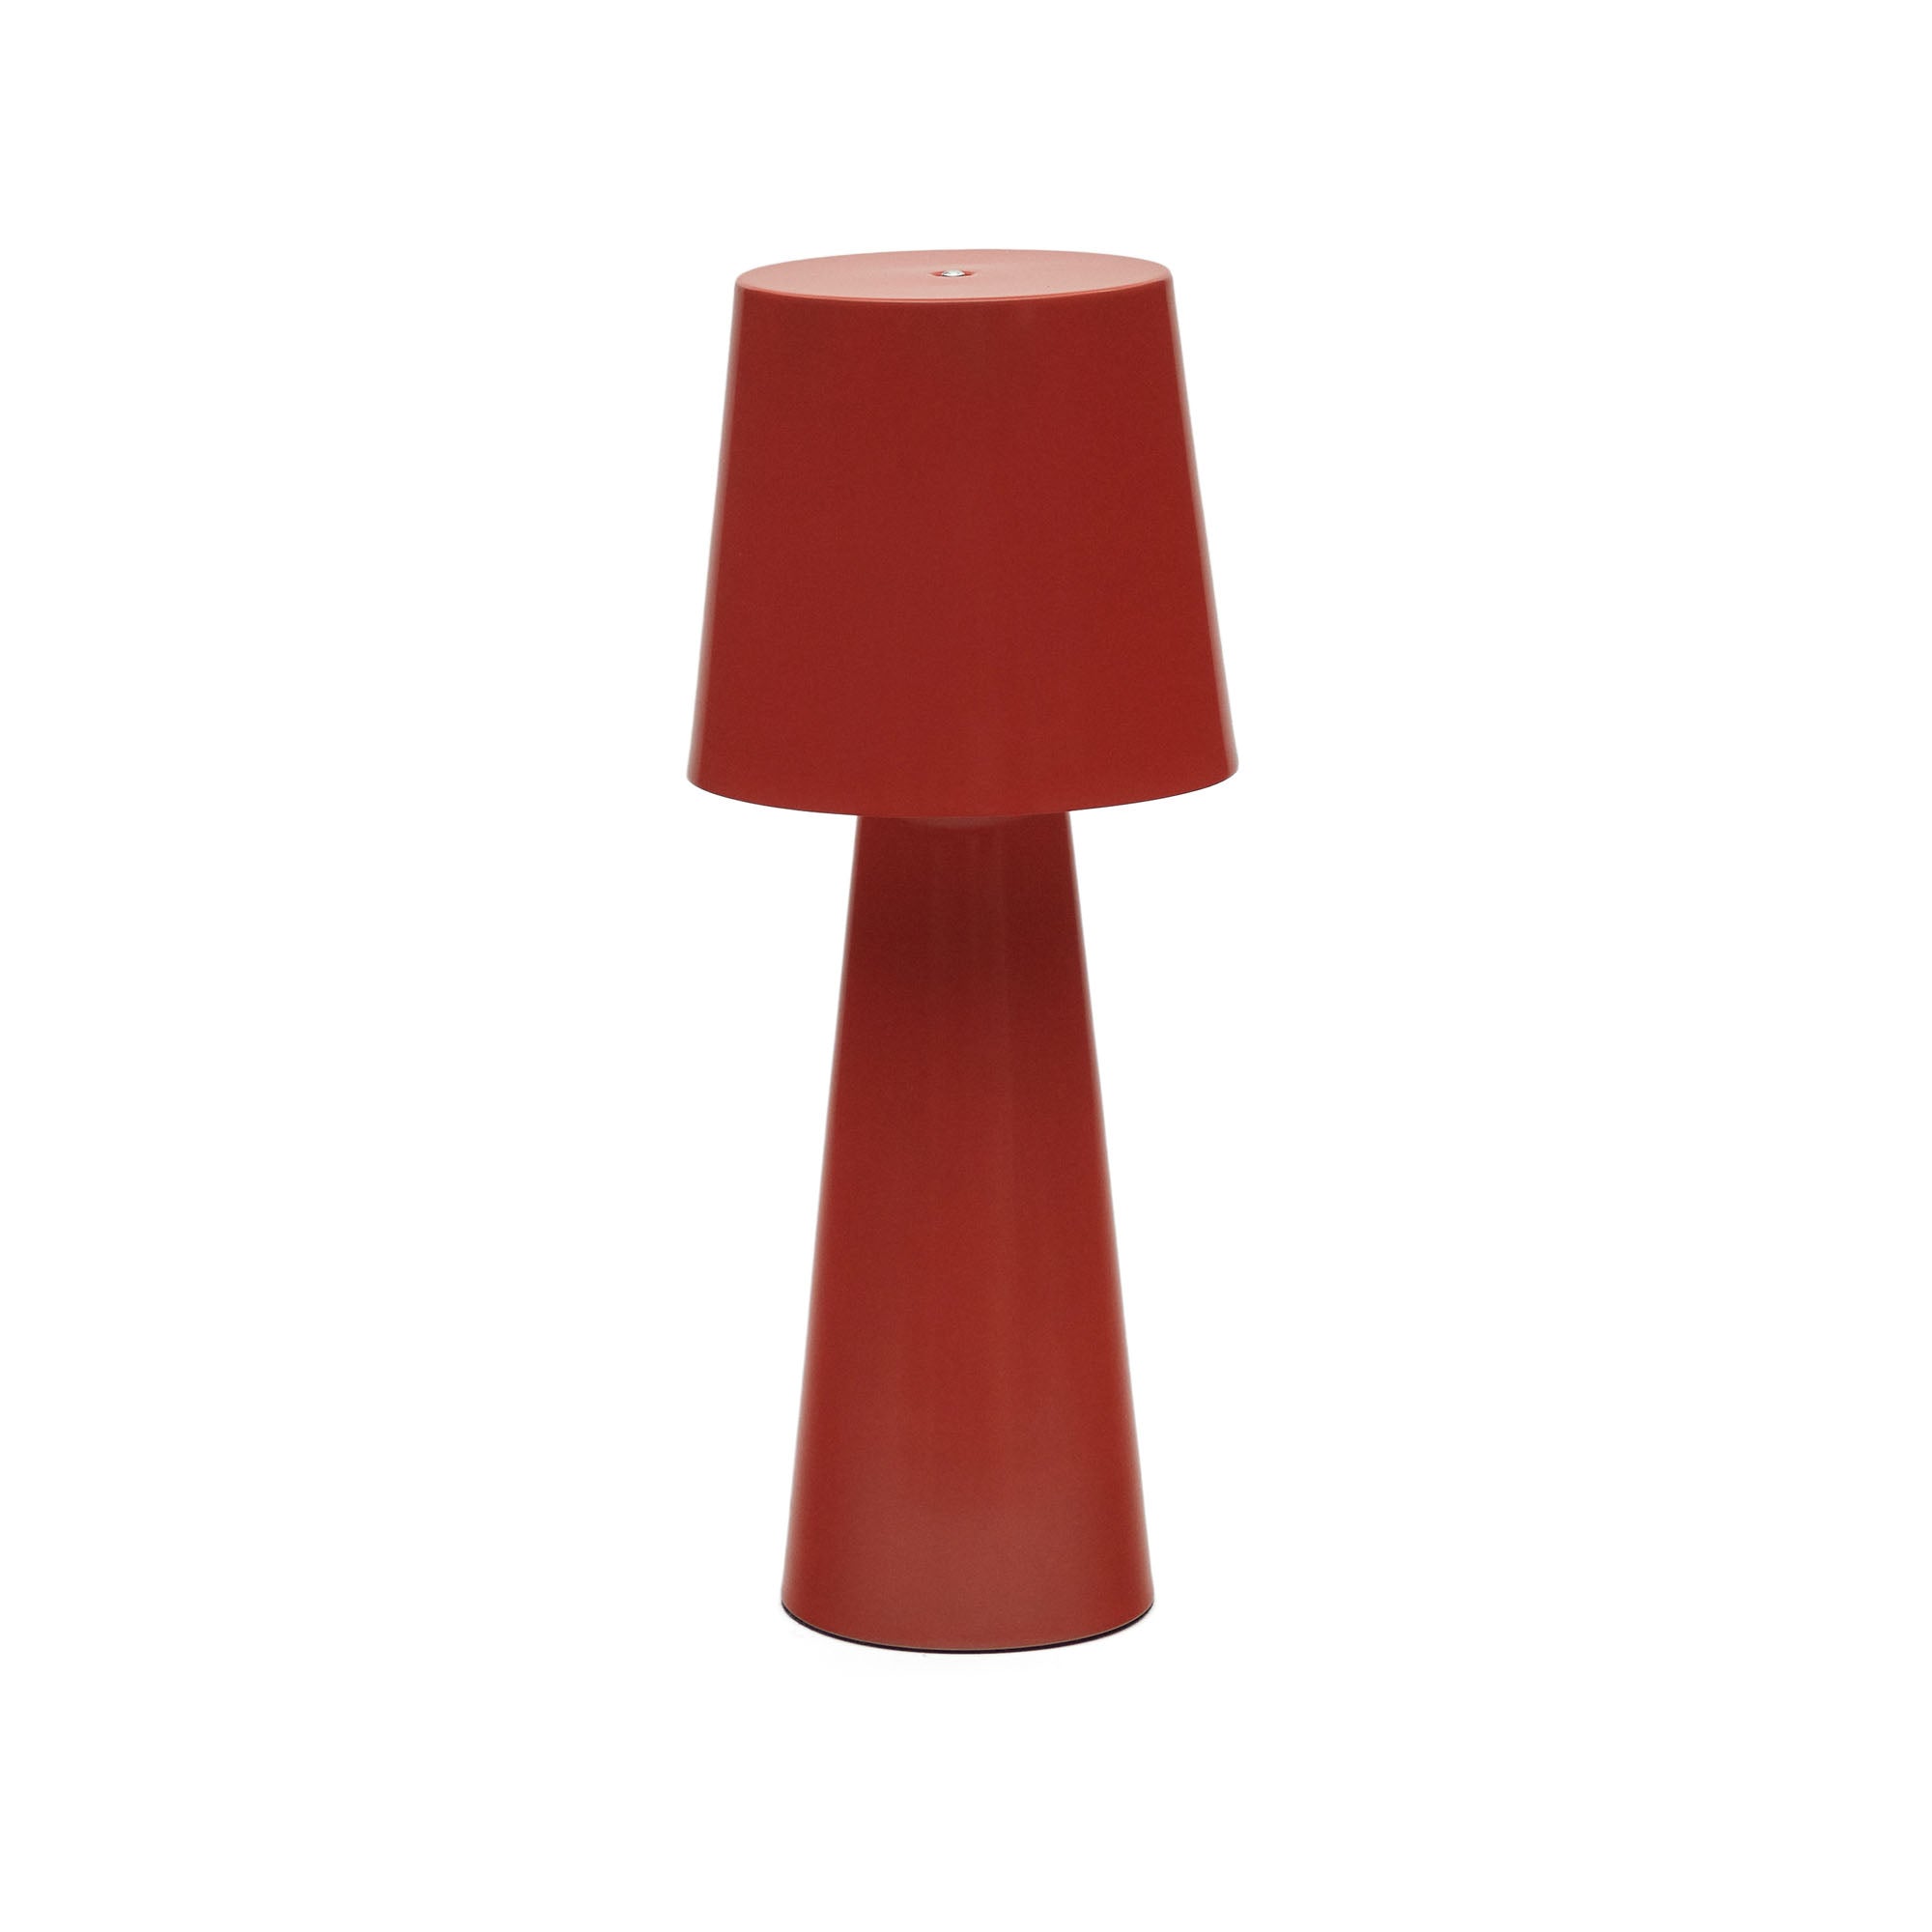 Arenys large table lamp with a red painted finish